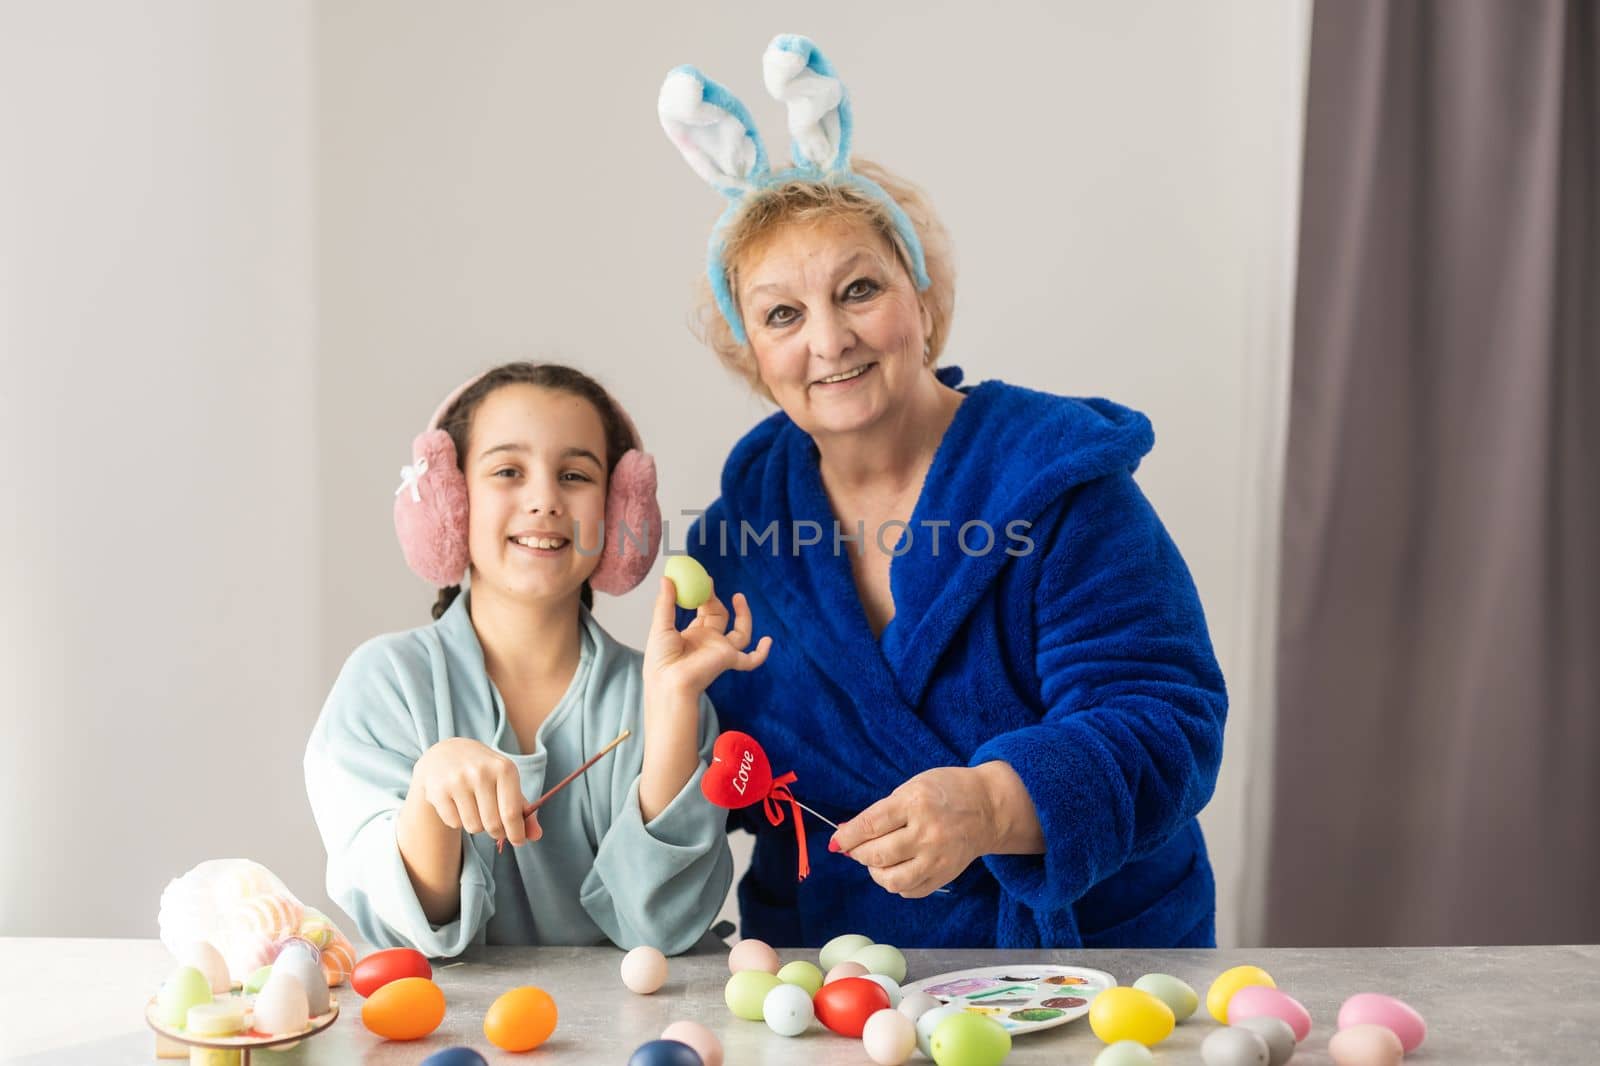 Little girl with grandmother dyeing Easter eggs.